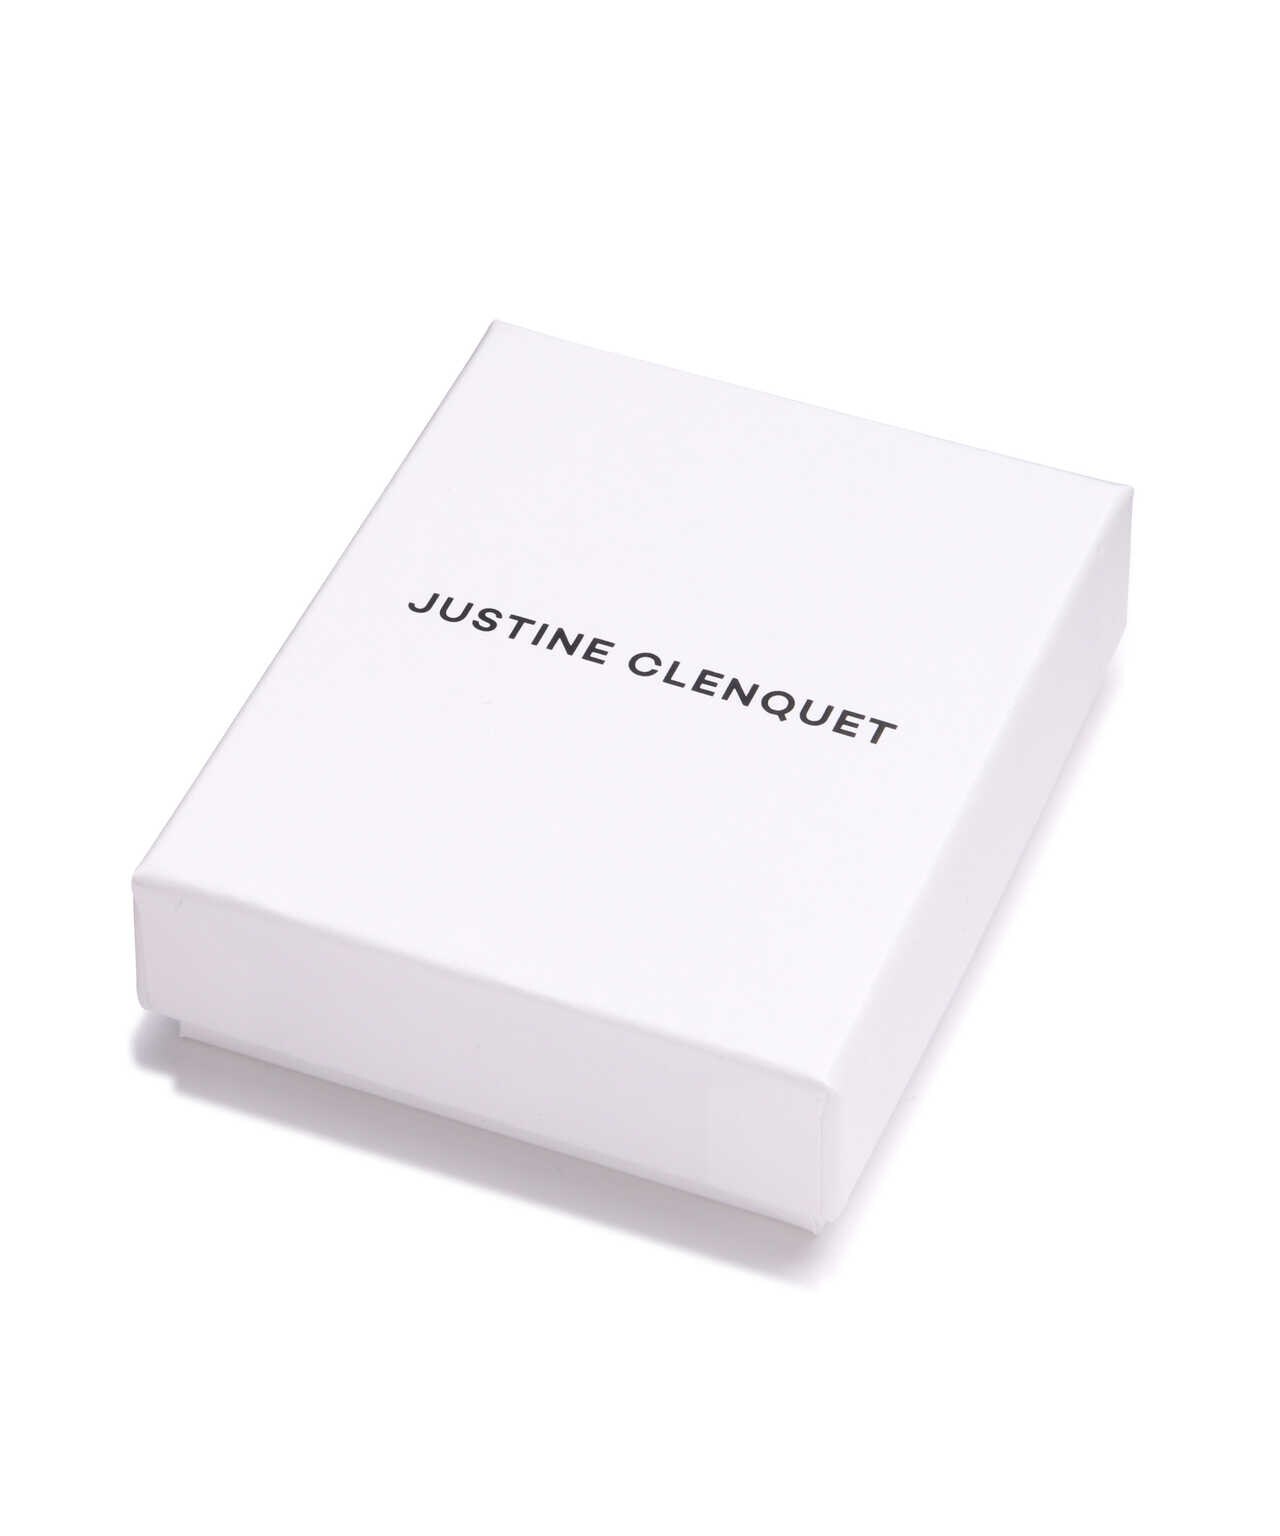 JUSTINE CLENQUET/ジュスティーヌ・クランケ/PASHA CLIP-ON EARRINGS